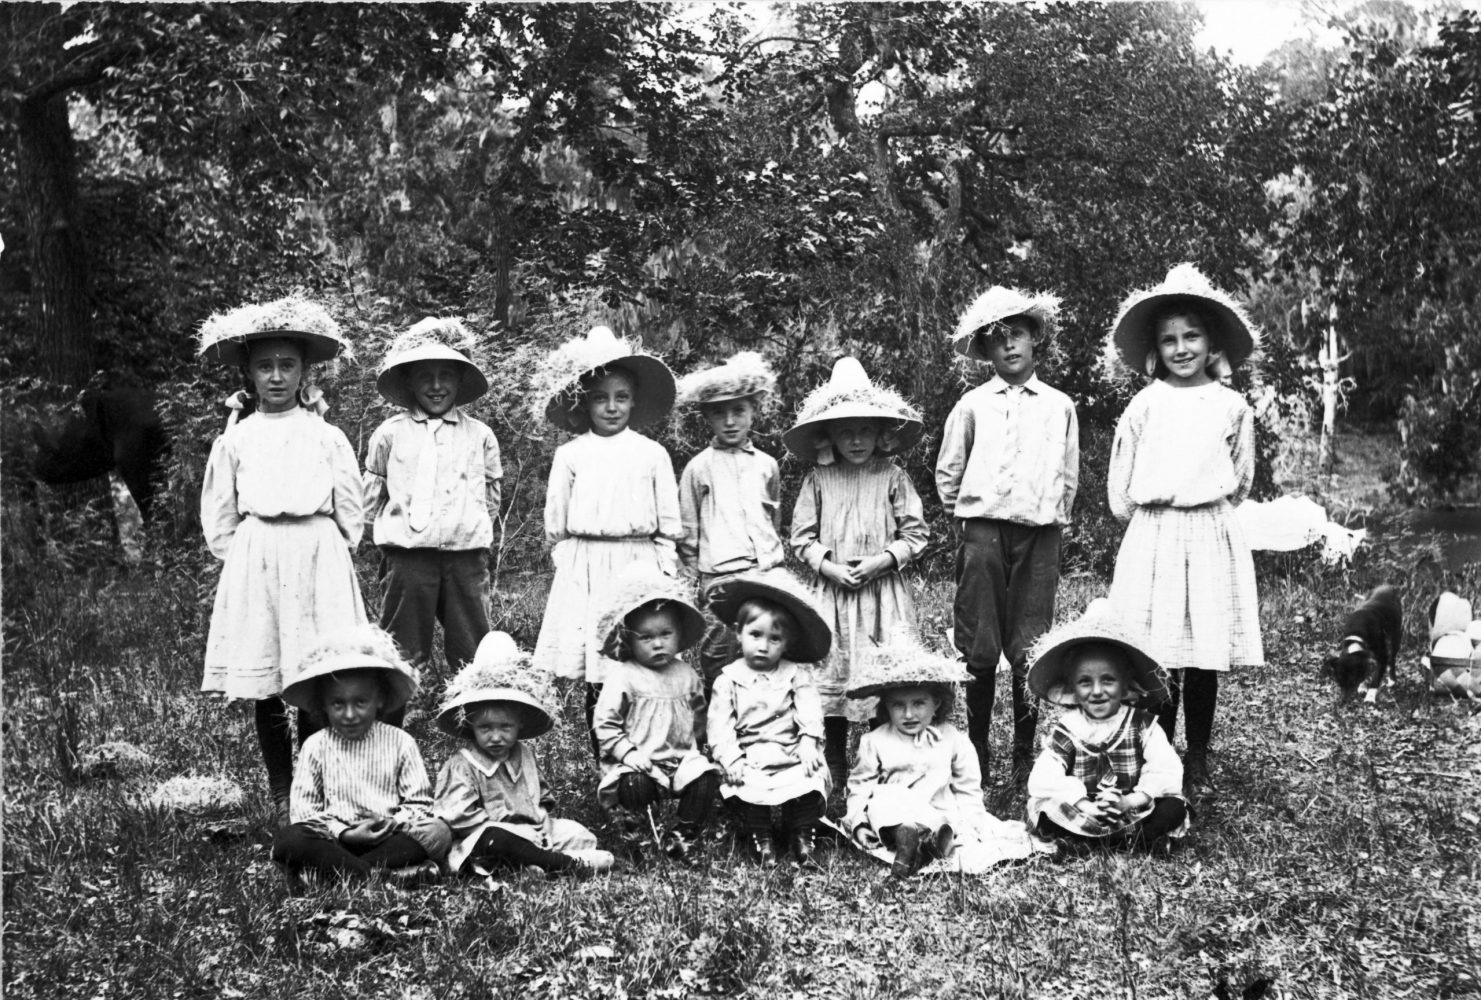 Picknickers wearing wide-brimmed hats trimmed with Spanish moss. Members of the Peter Jud and Henry Wosnig families, on Salado Creek south of San Antonio, c. 1910
Janice B. Schwab and Adele J. Steiger, New Braunfels, Texas
UTSA Special Collections